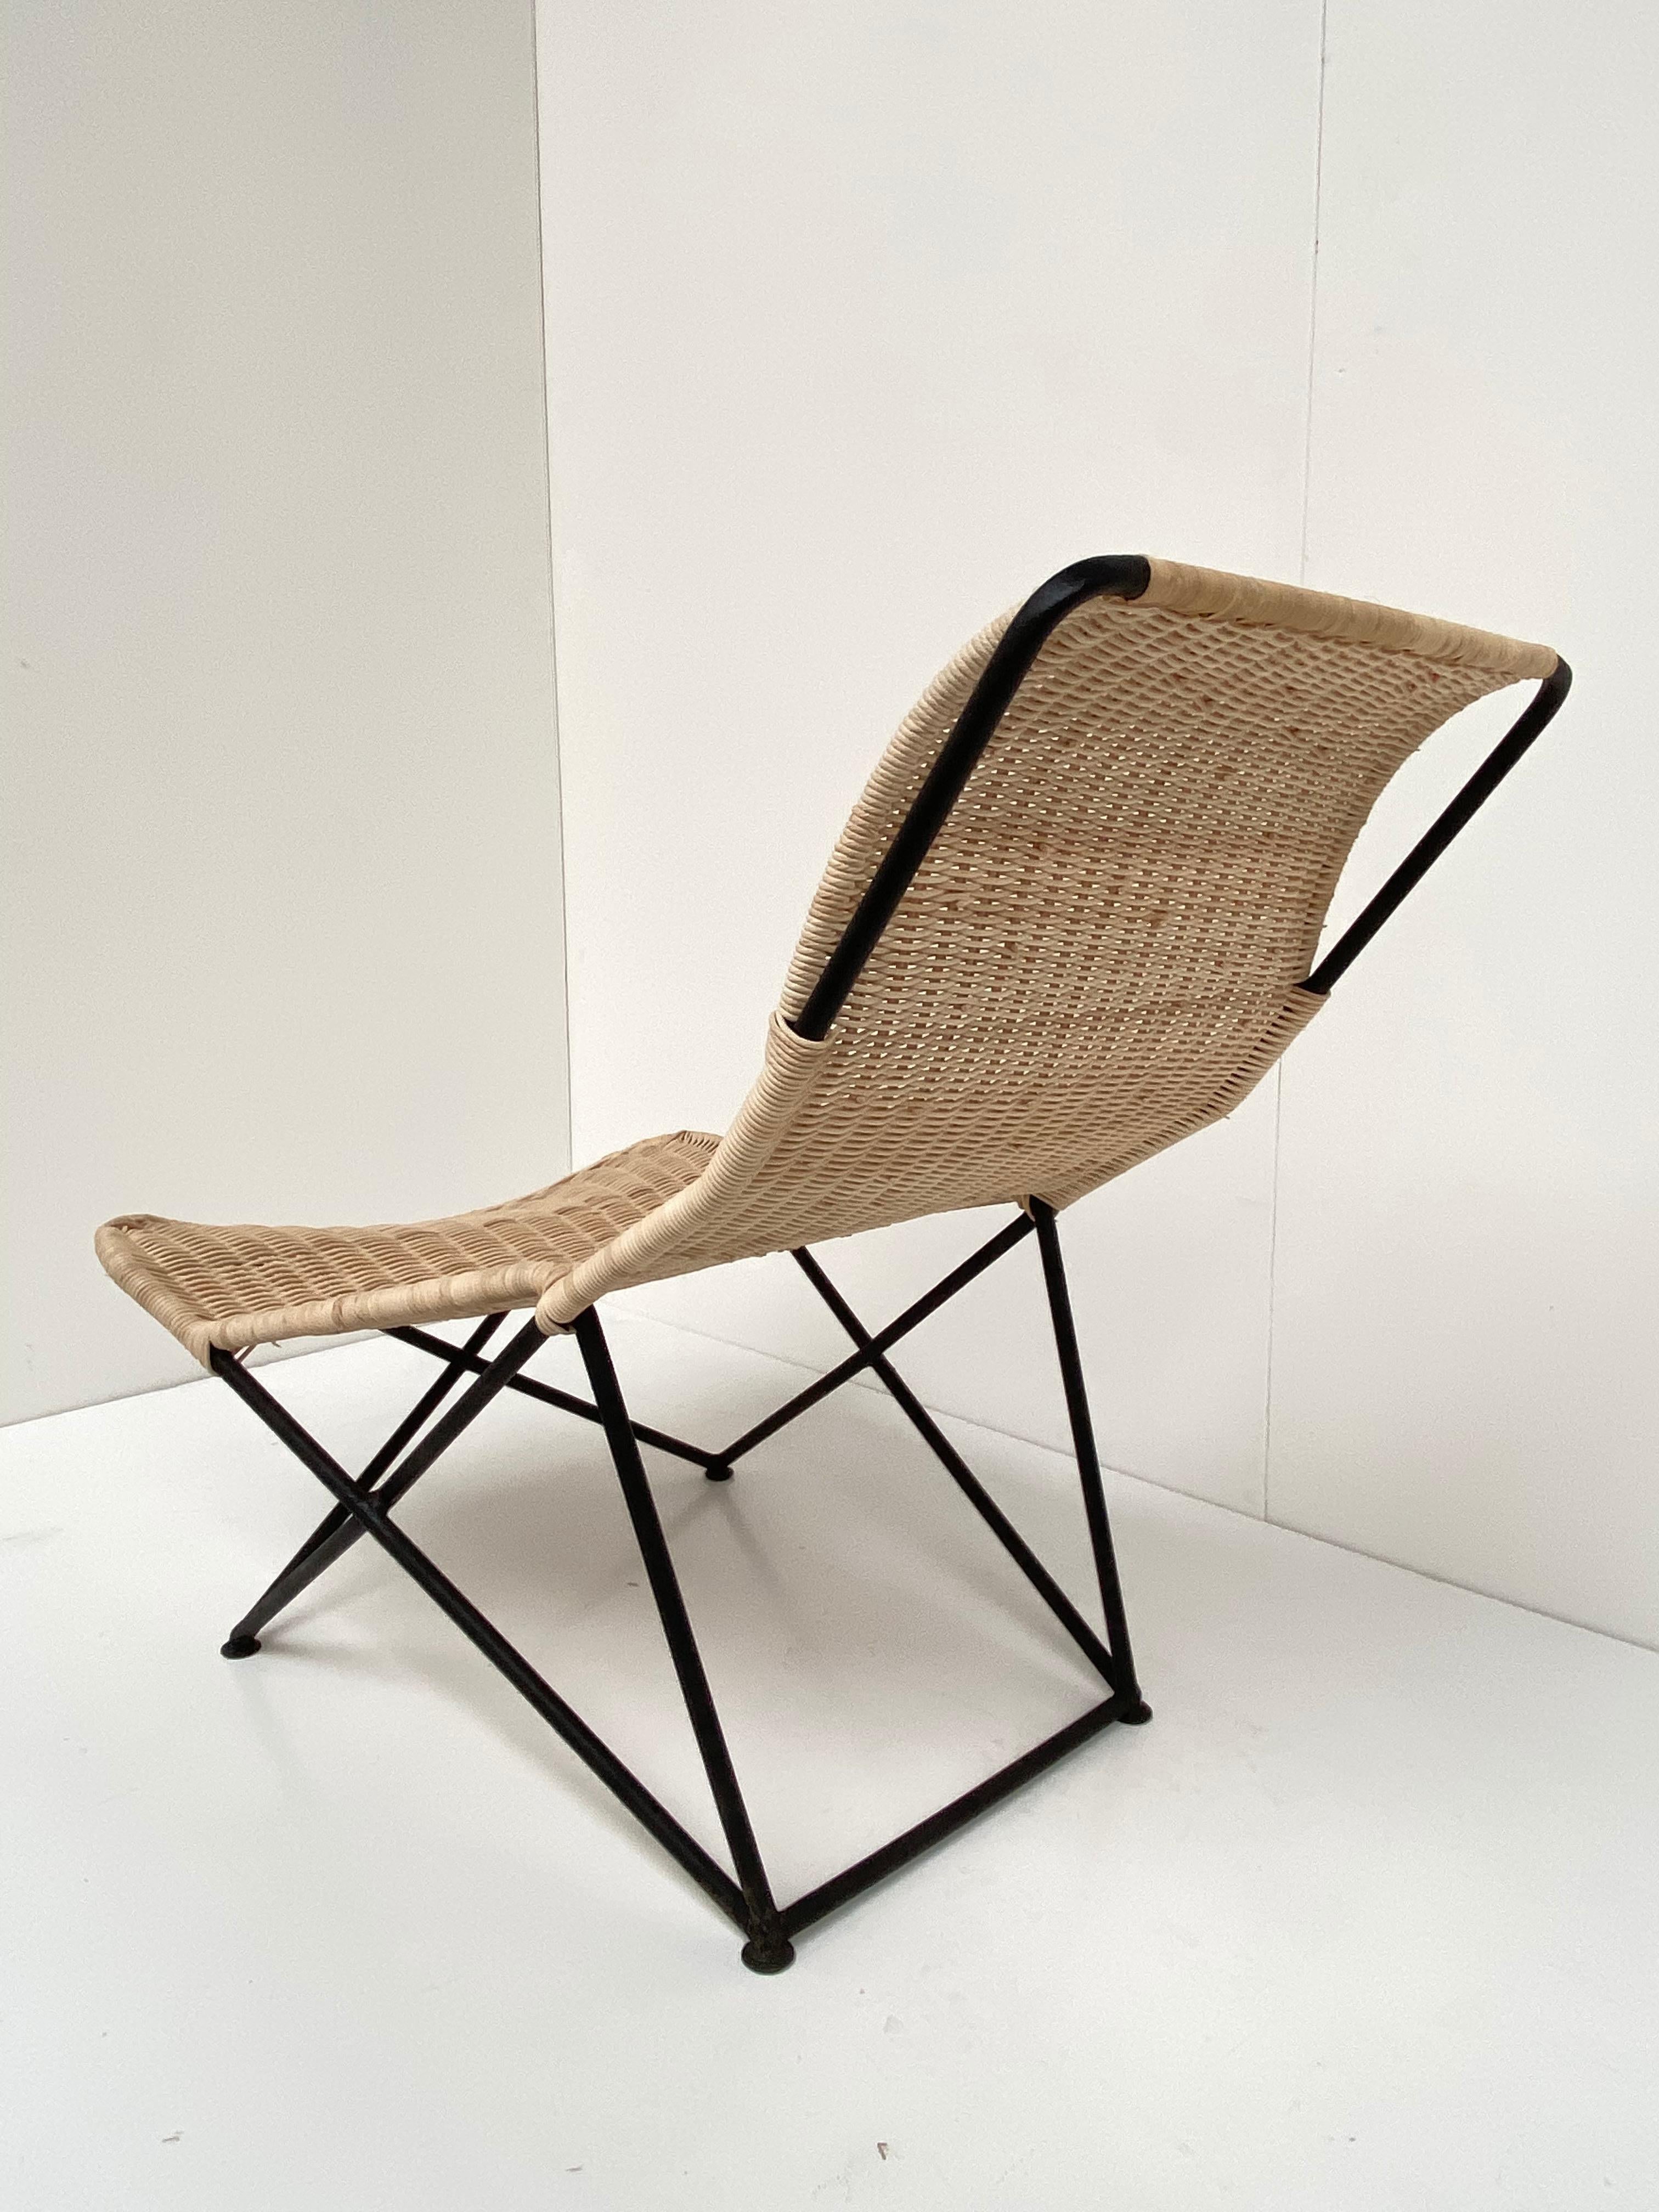 French Stunning Sculptural Form Wicker Chaise Attributed to Raoul Guys, France, 1950's For Sale